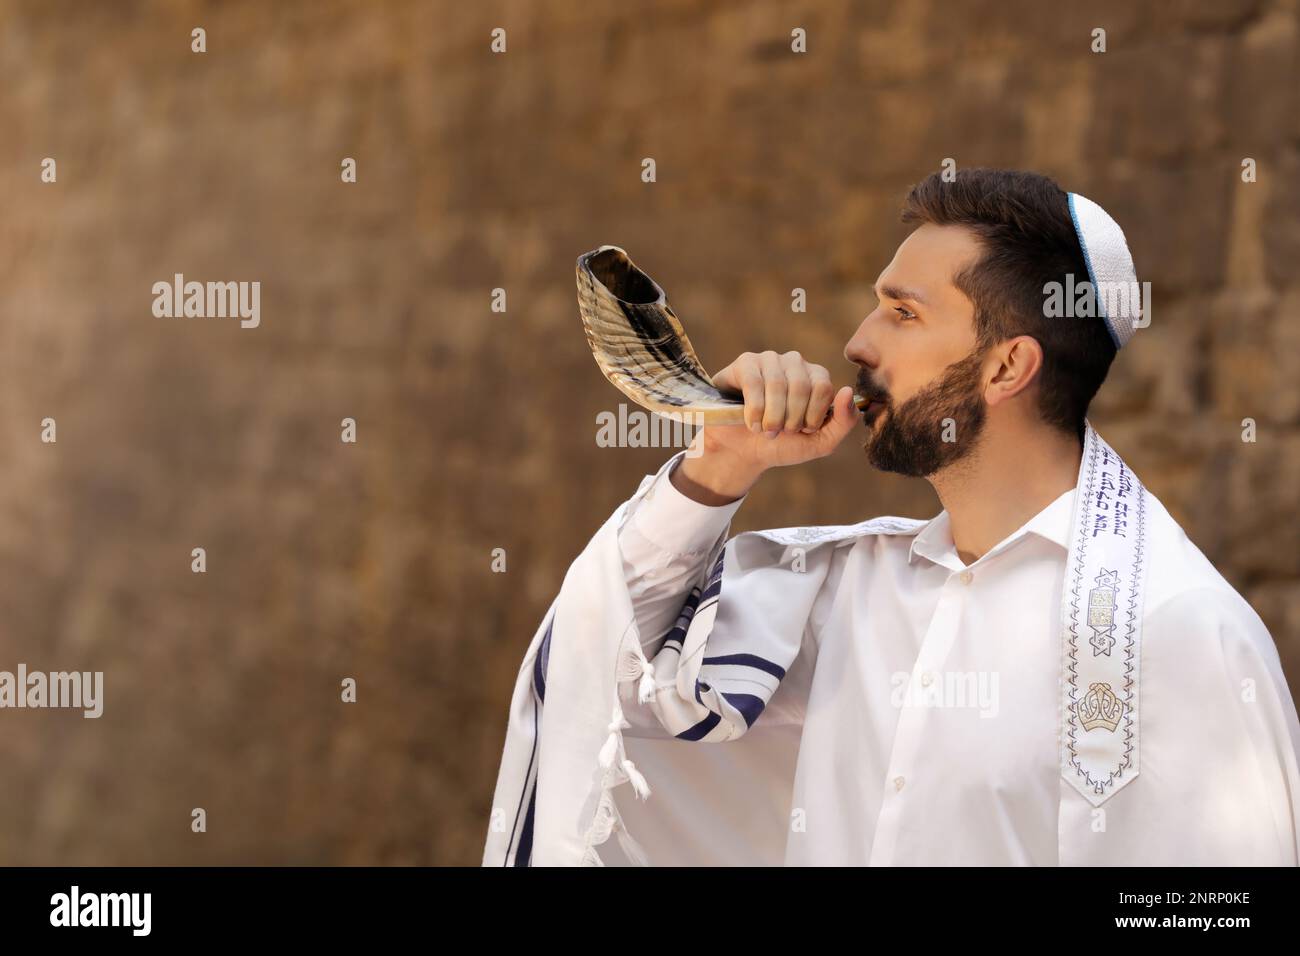 Jewish man blowing shofar on Rosh Hashanah outdoors. Wearing tallit with words Blessed Are You, Lord Our God, King Of The Universe, Who Has Sanctified Stock Photo